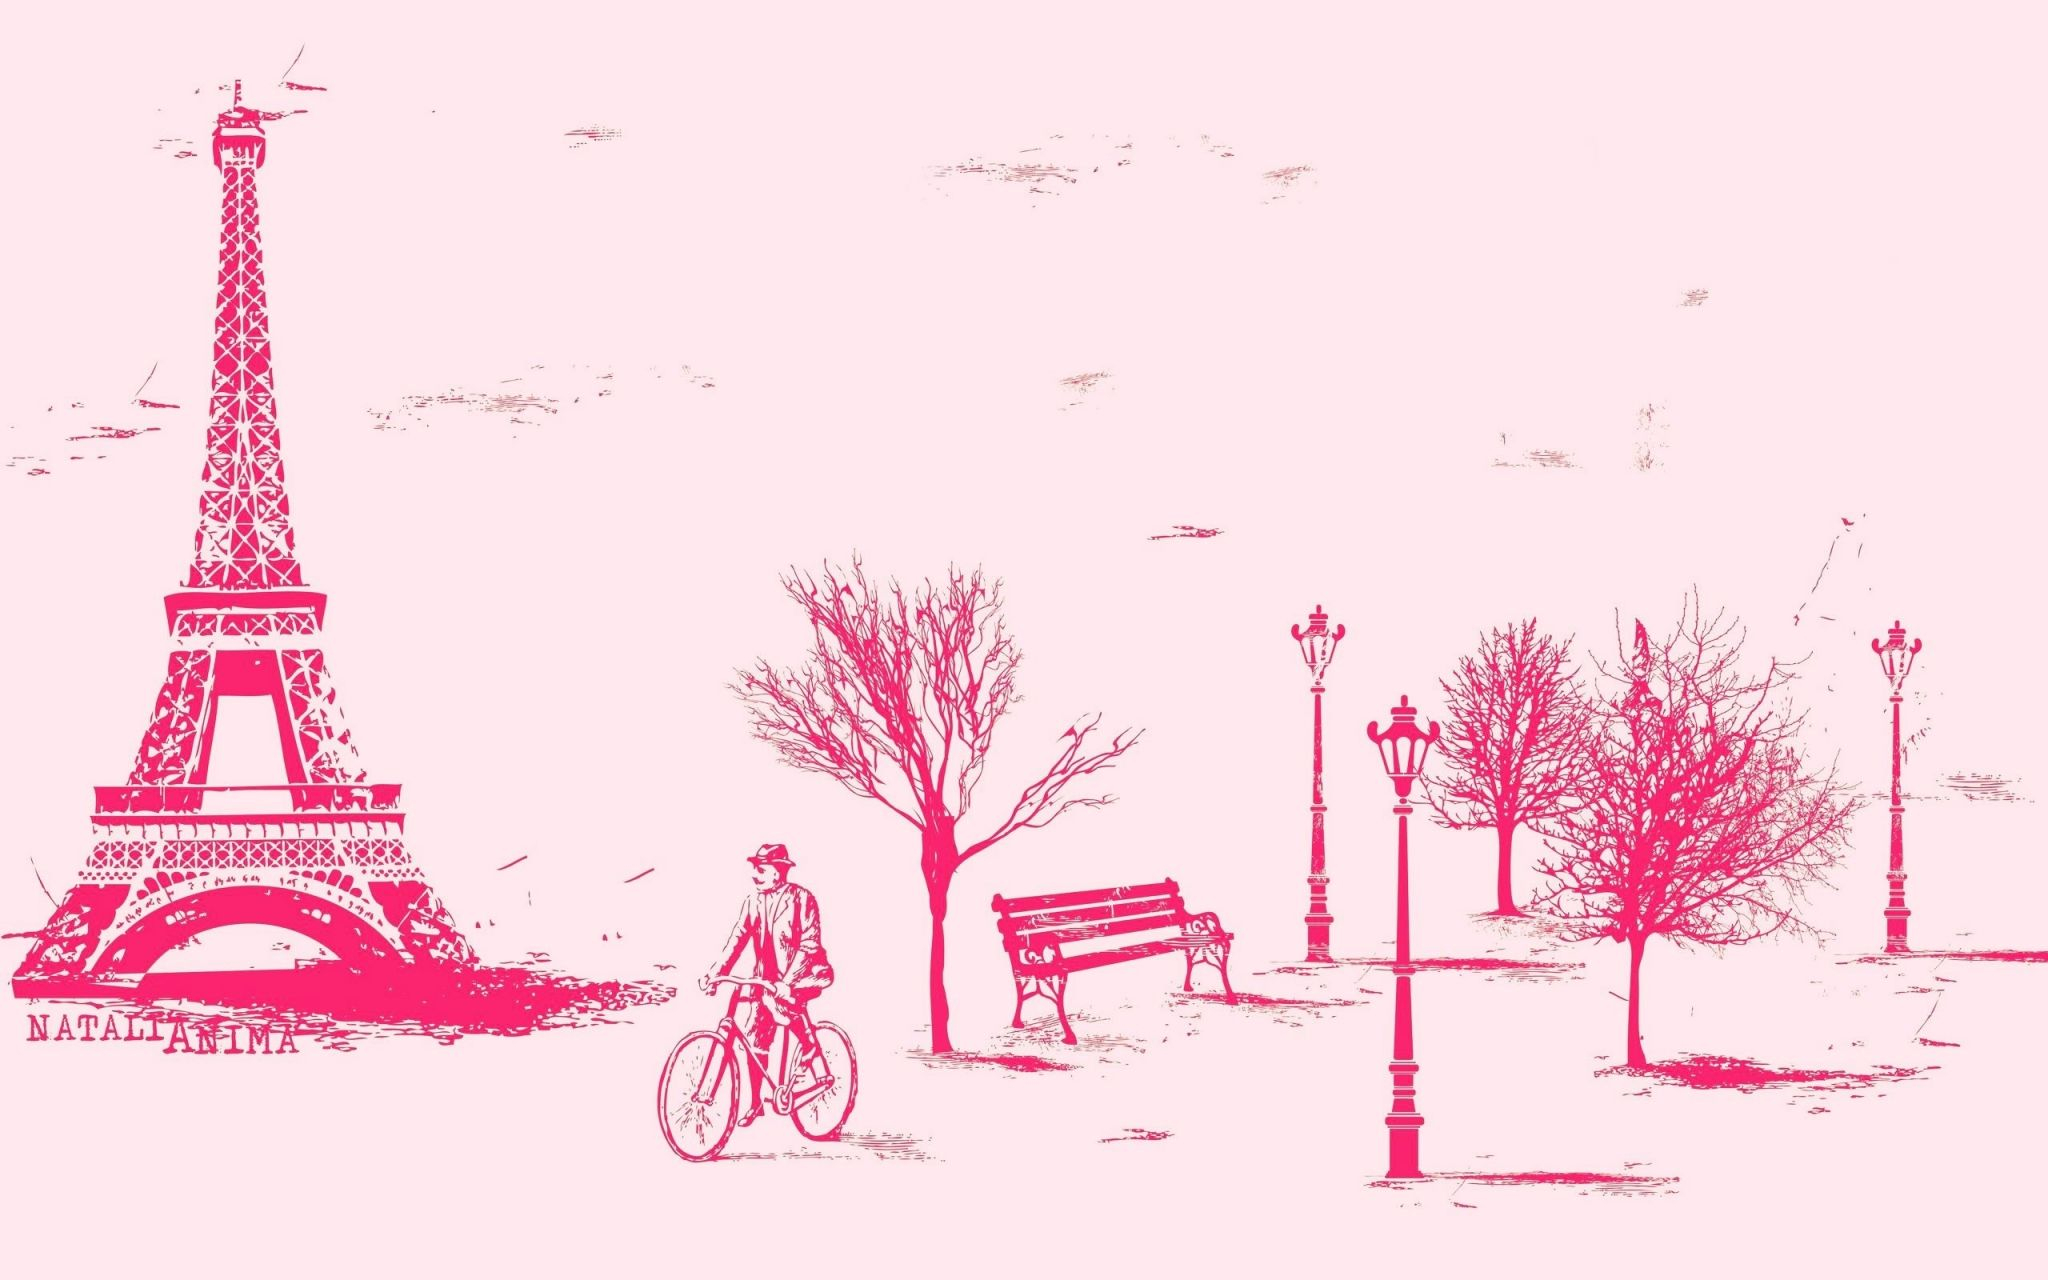 2048x1280 pink background wallpaper for computer free | Pink wallpaper backgrounds, Pink wallpaper, Pink paris wallpaper